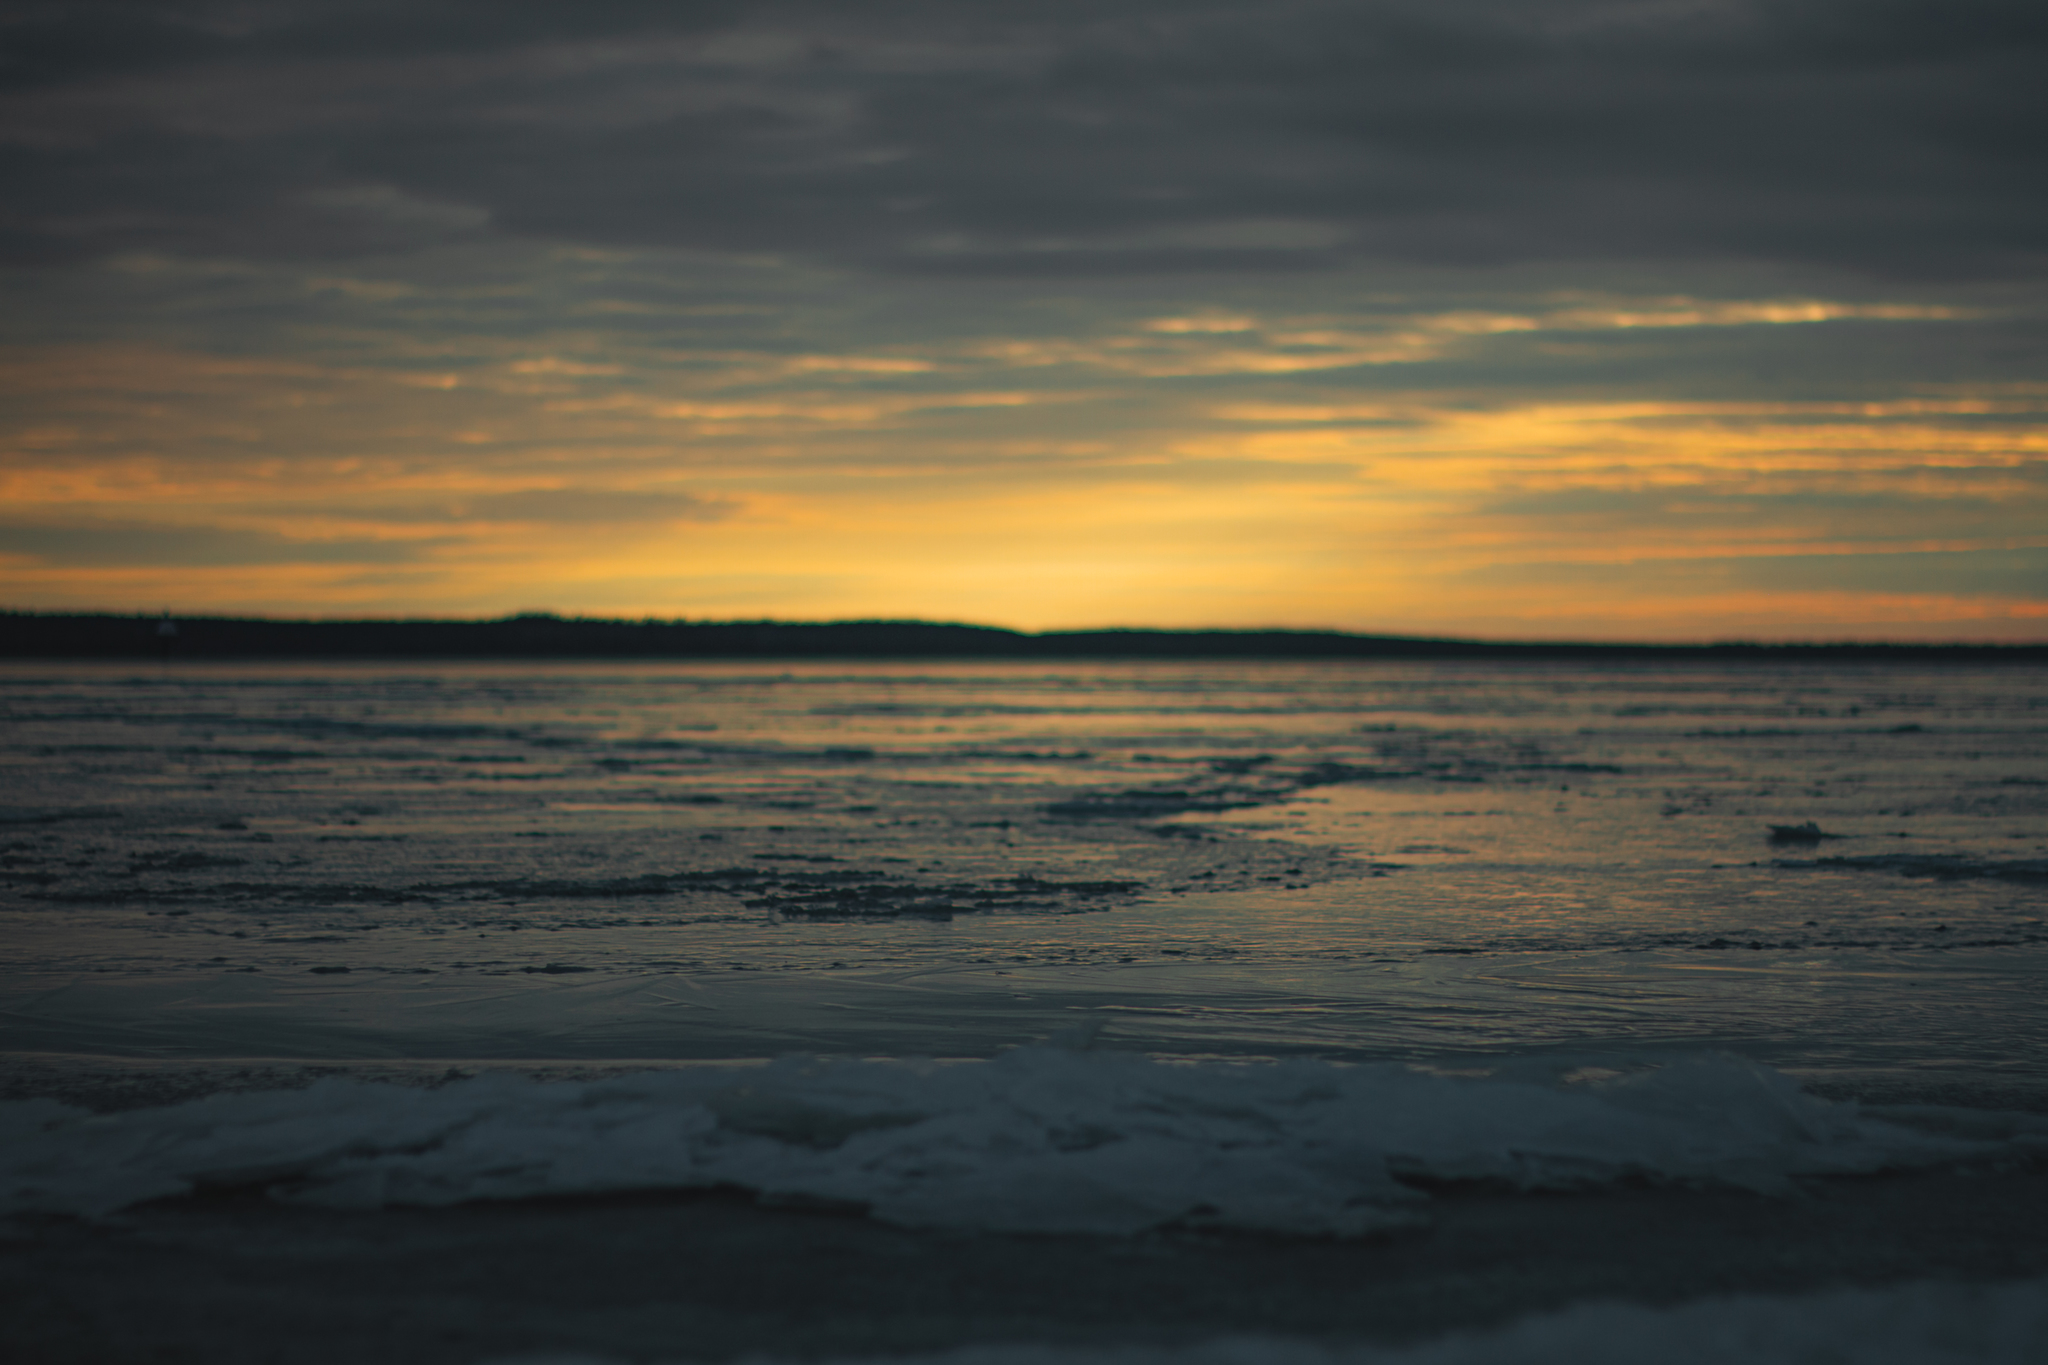 Surroundings - My, The photo, The nature of Russia, Canon 7d, Sunset, Beginning photographer, Shore, Lightroom, beauty of nature, Ice